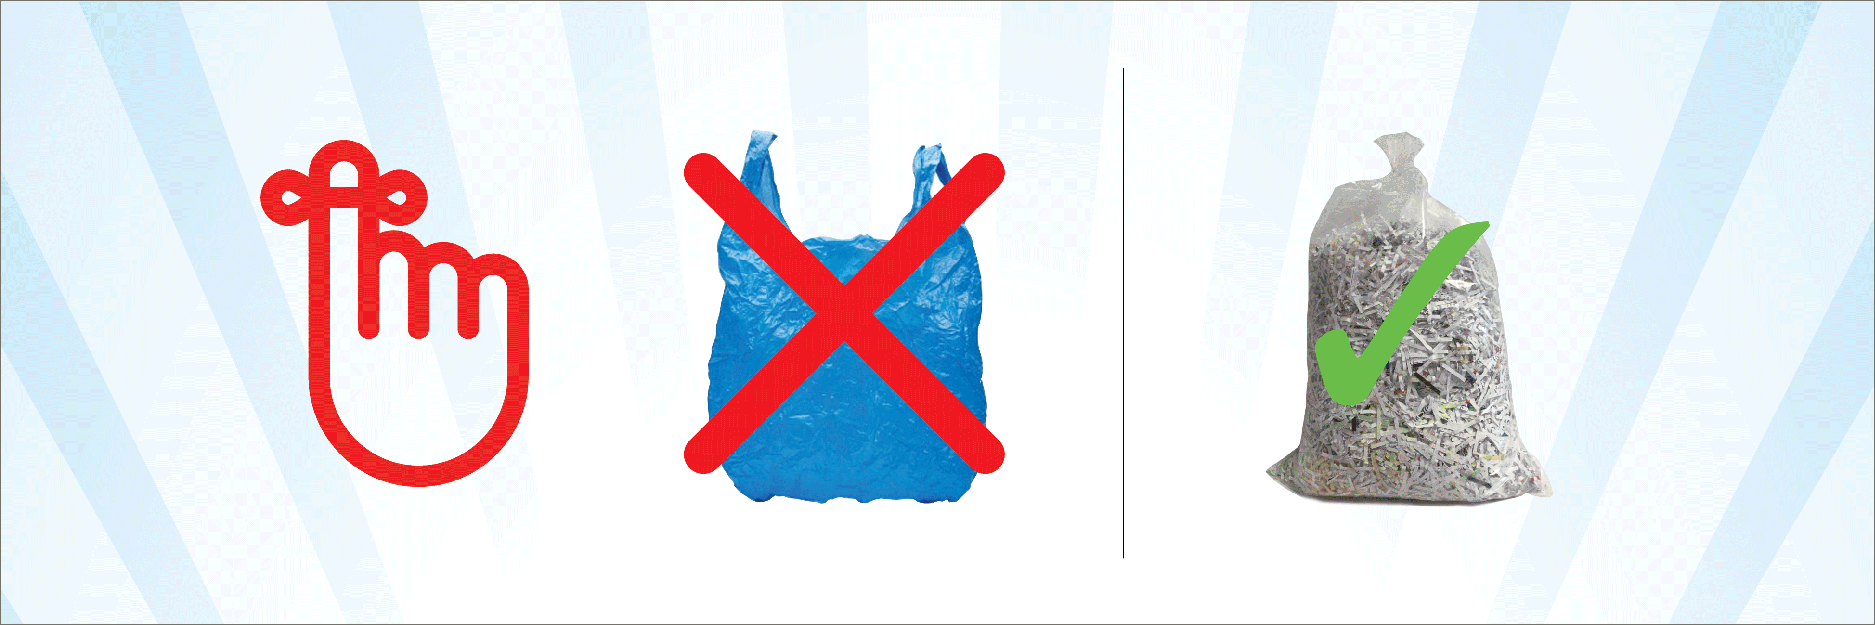 https://www.ohswa.org/assets/Am-I-Recyclable/Aug_PlasticBag_NewAnswer_1875x625.png